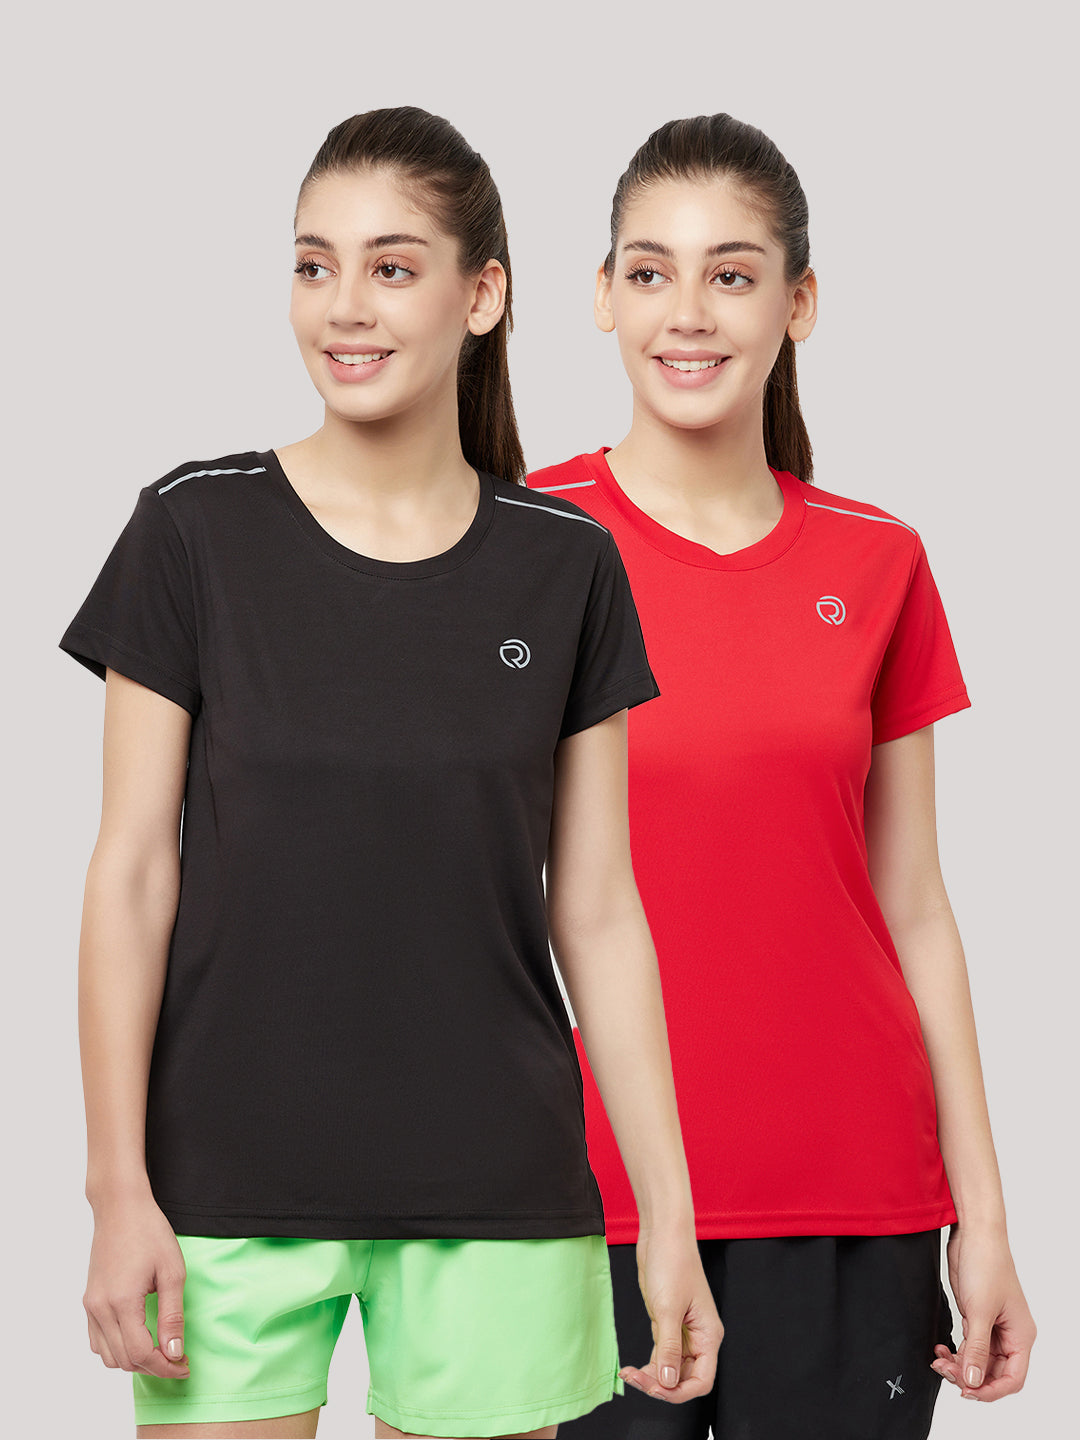 Performance Sports T-shirt - Pack of 2 Black & Red